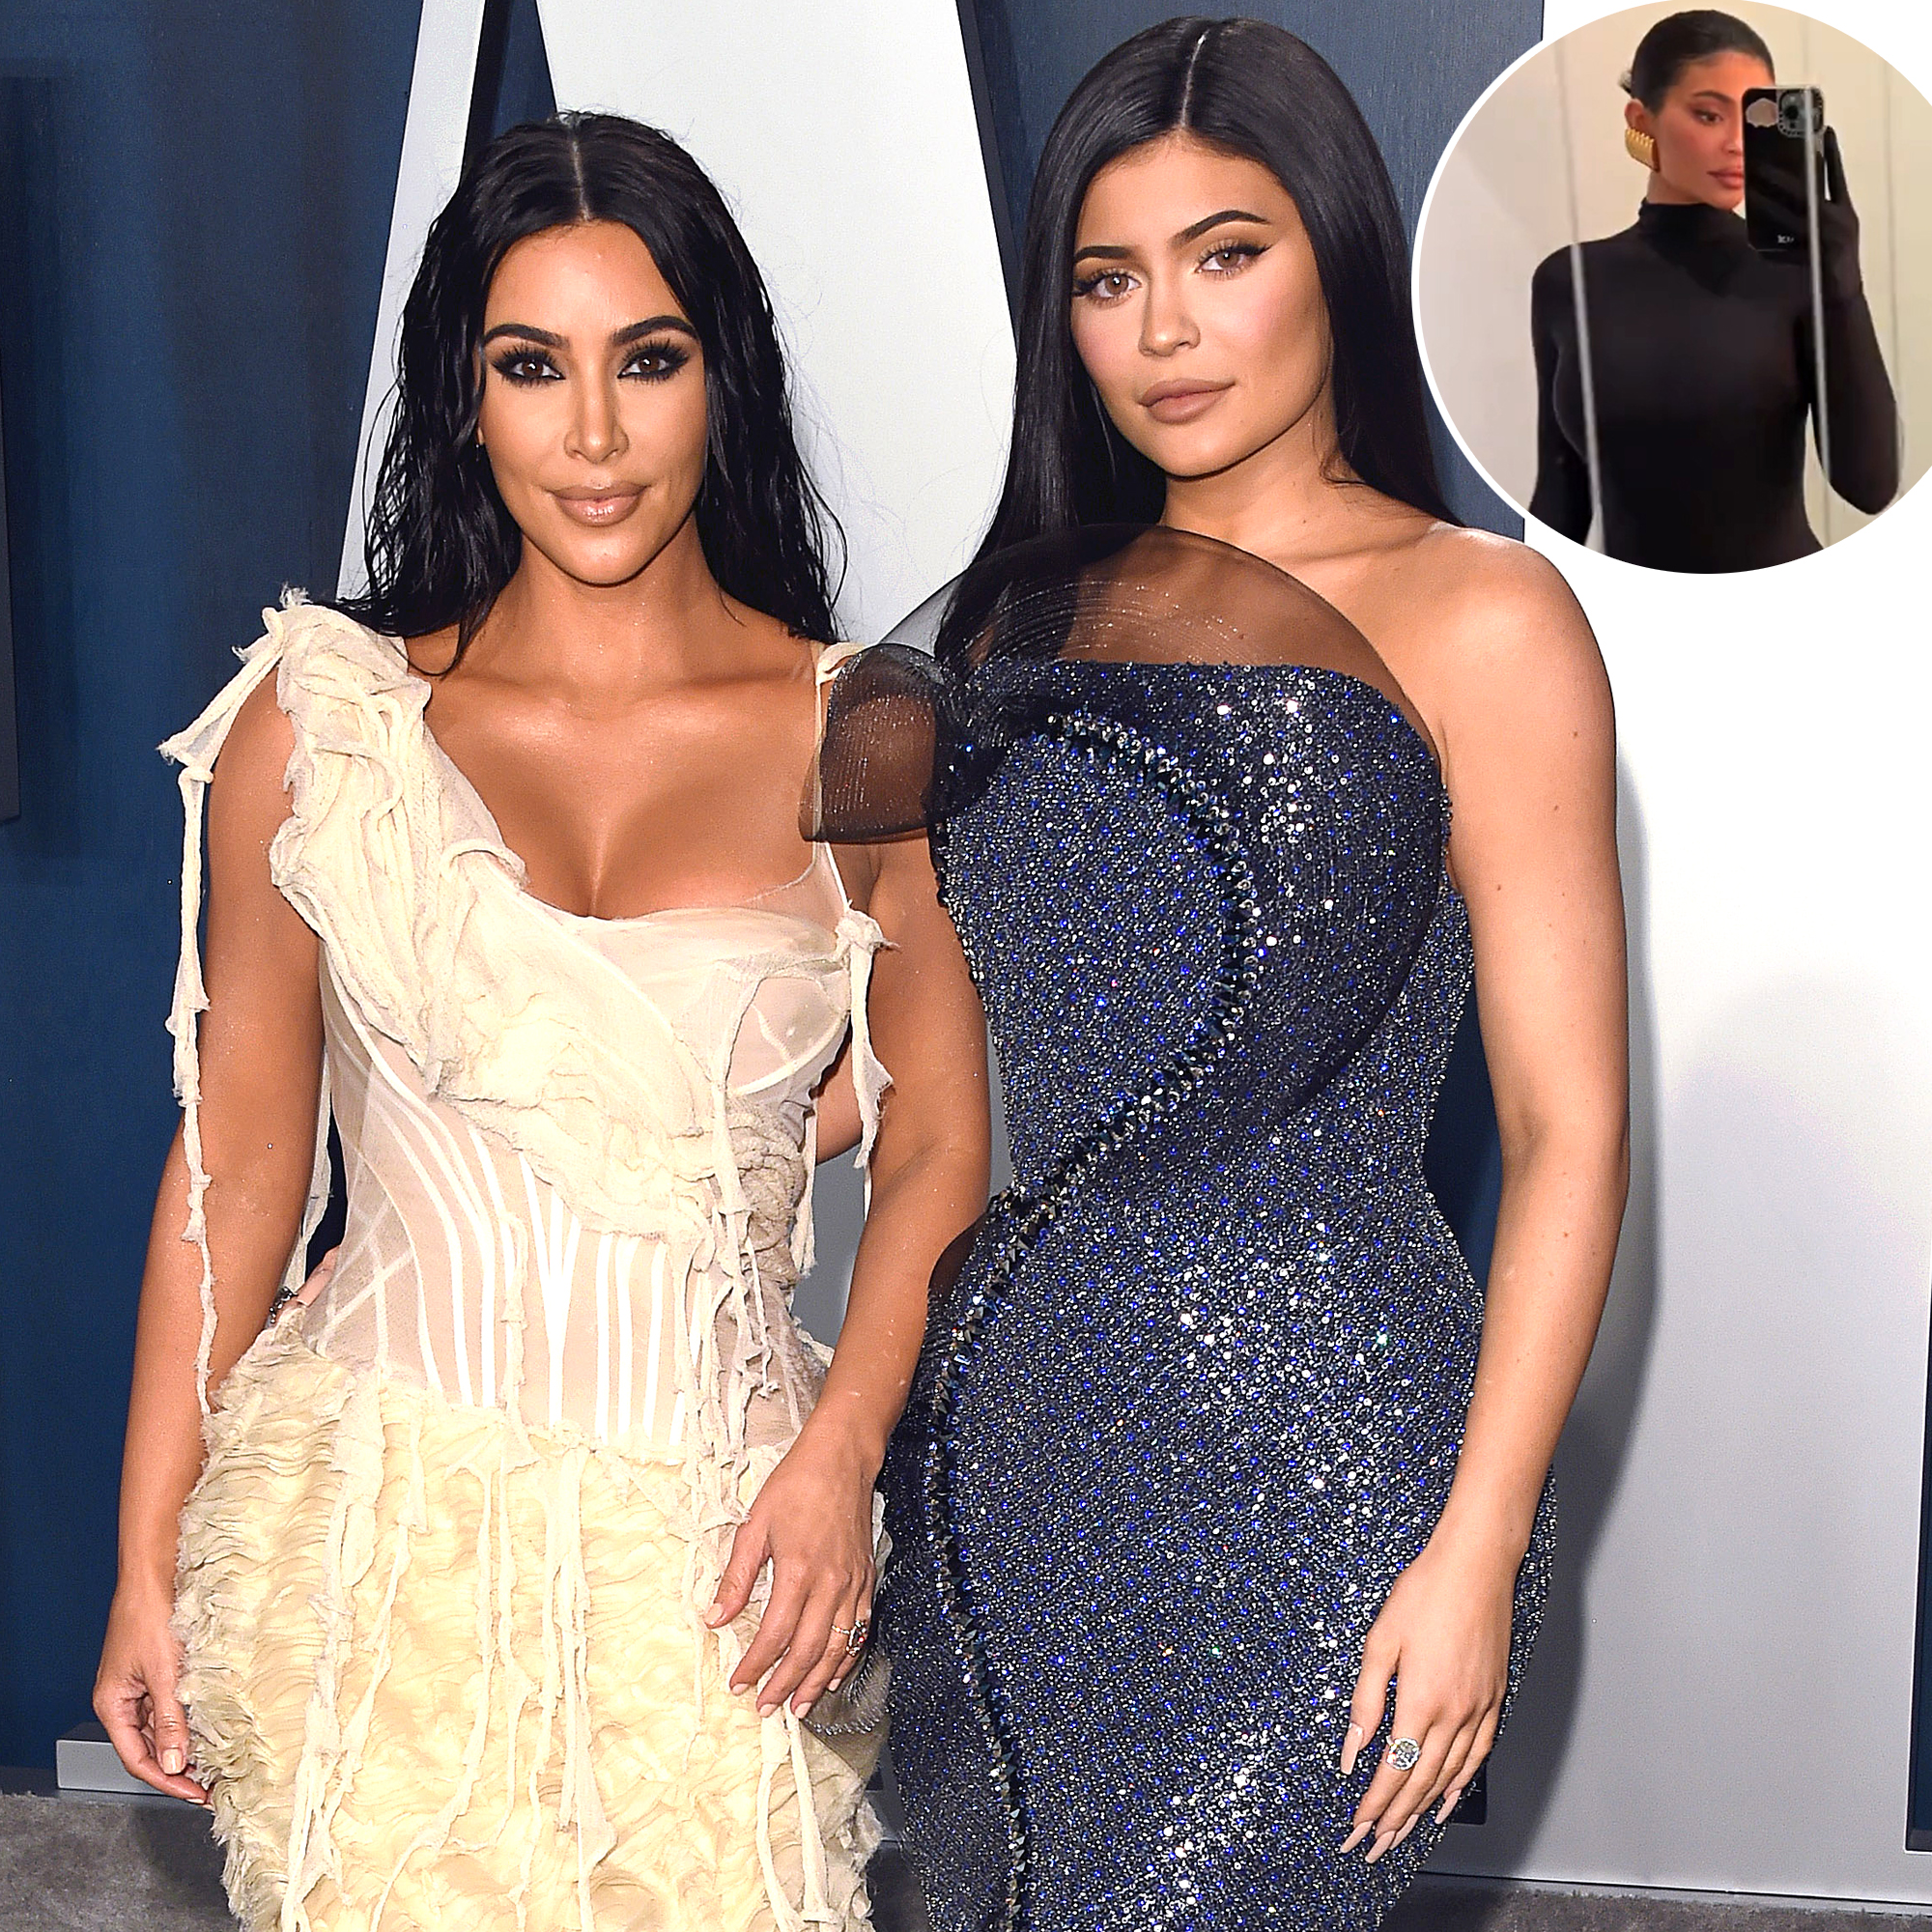 Kylie Jenner models a SKIMS top for sister Kim Kardashian with